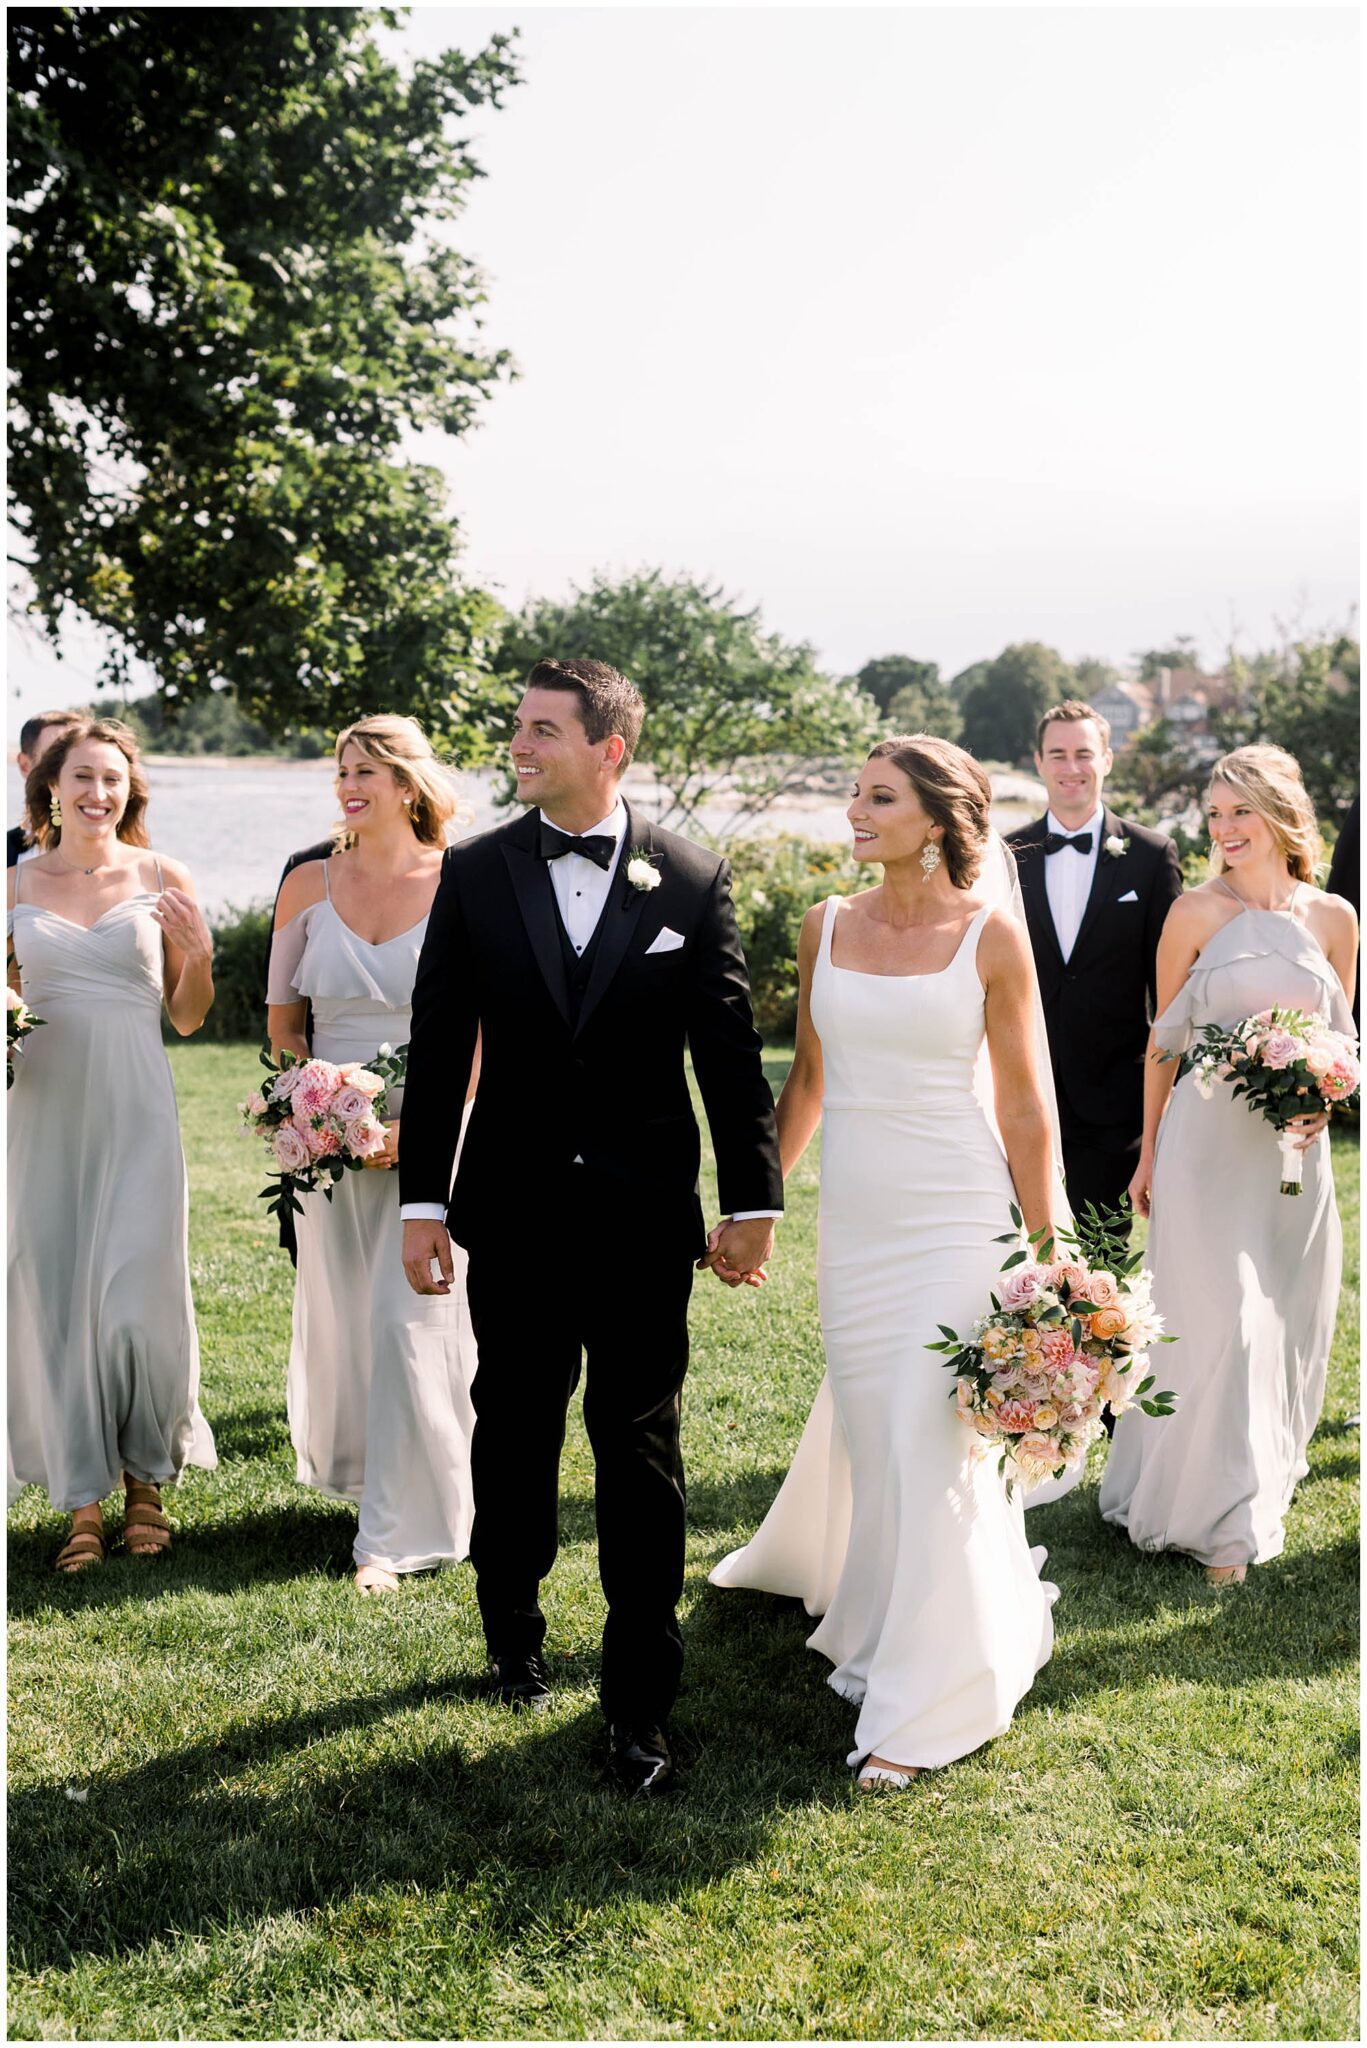 Bridal Party photos at Newcastle Commons in Rye, NH.